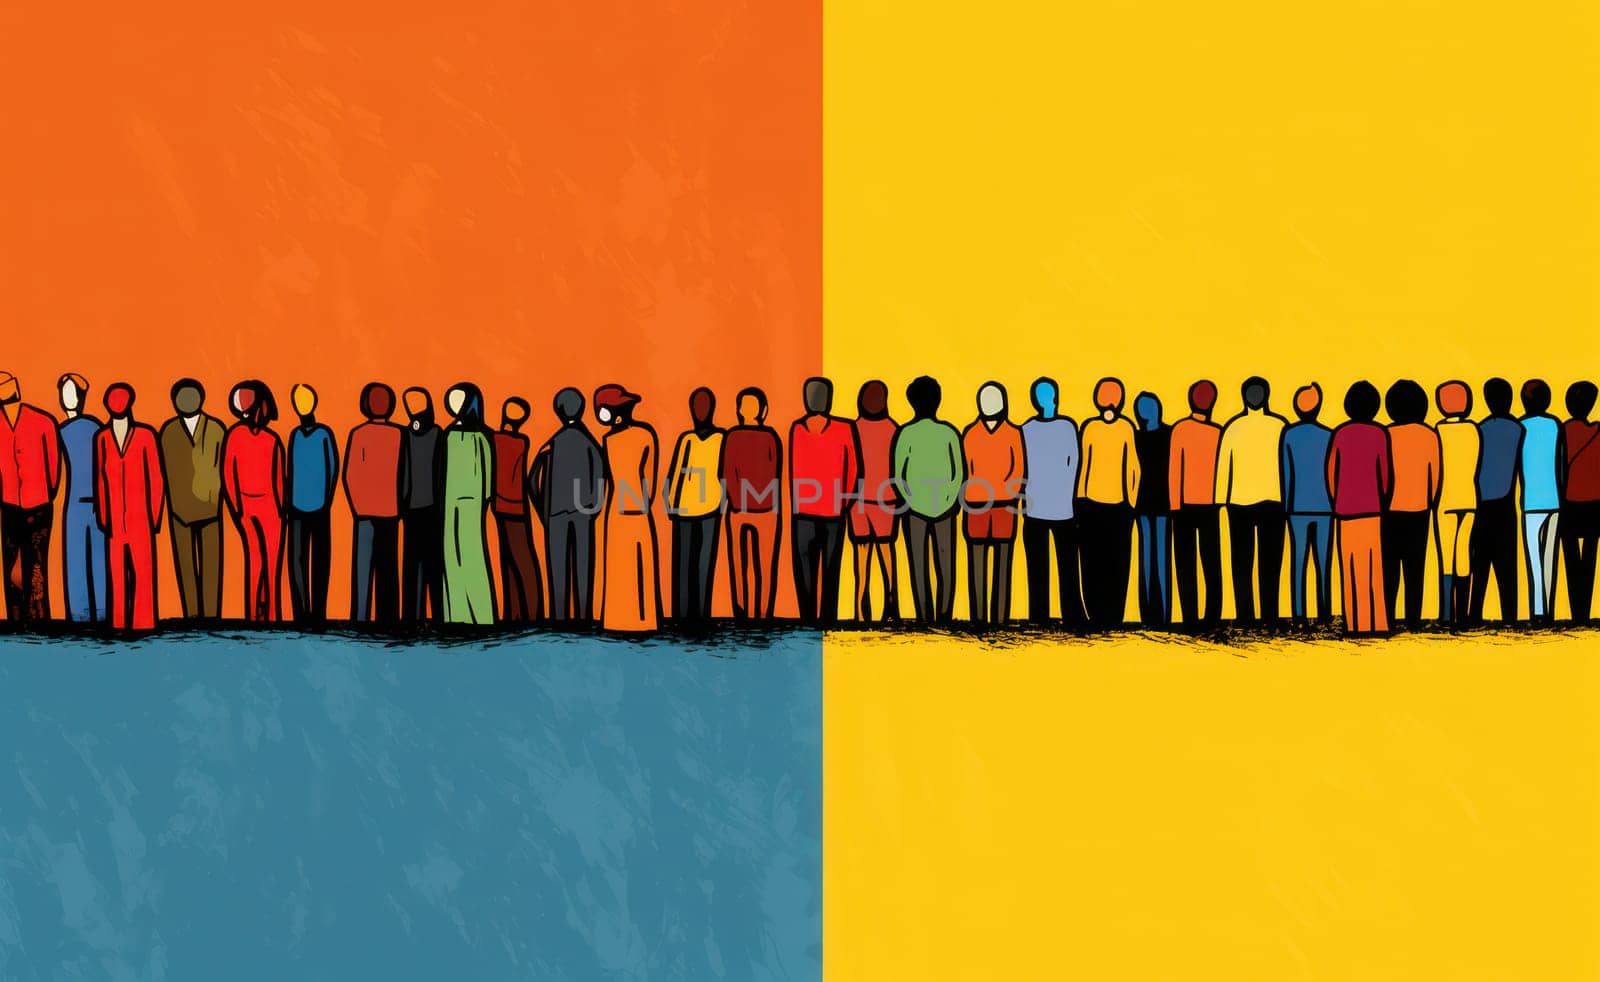 United in Diversity: A Colorful Illustration of a Social Group Standing Together in Unity and Cooperation